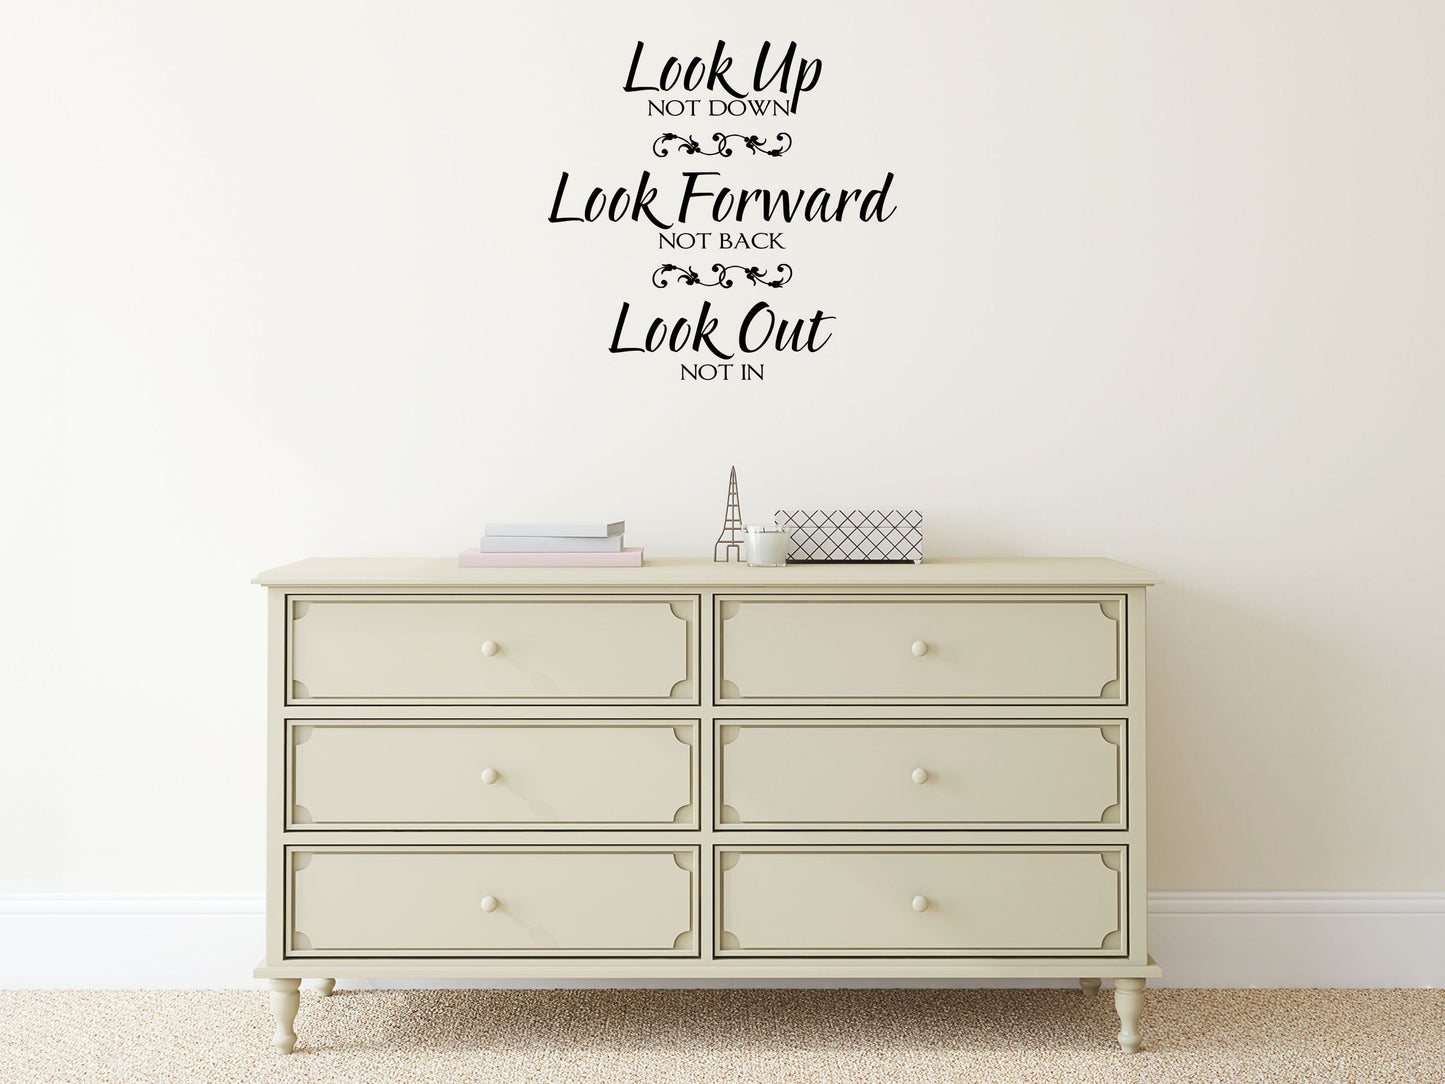 Look Up Not Down Decal Wall Decal Custom Wall Custom Quote Look Up Sign Inspirational Wall Decal - Wall Quote Decals - Wall Quotes Custom Vinyl Wall Decal Inspirational Wall Signs 